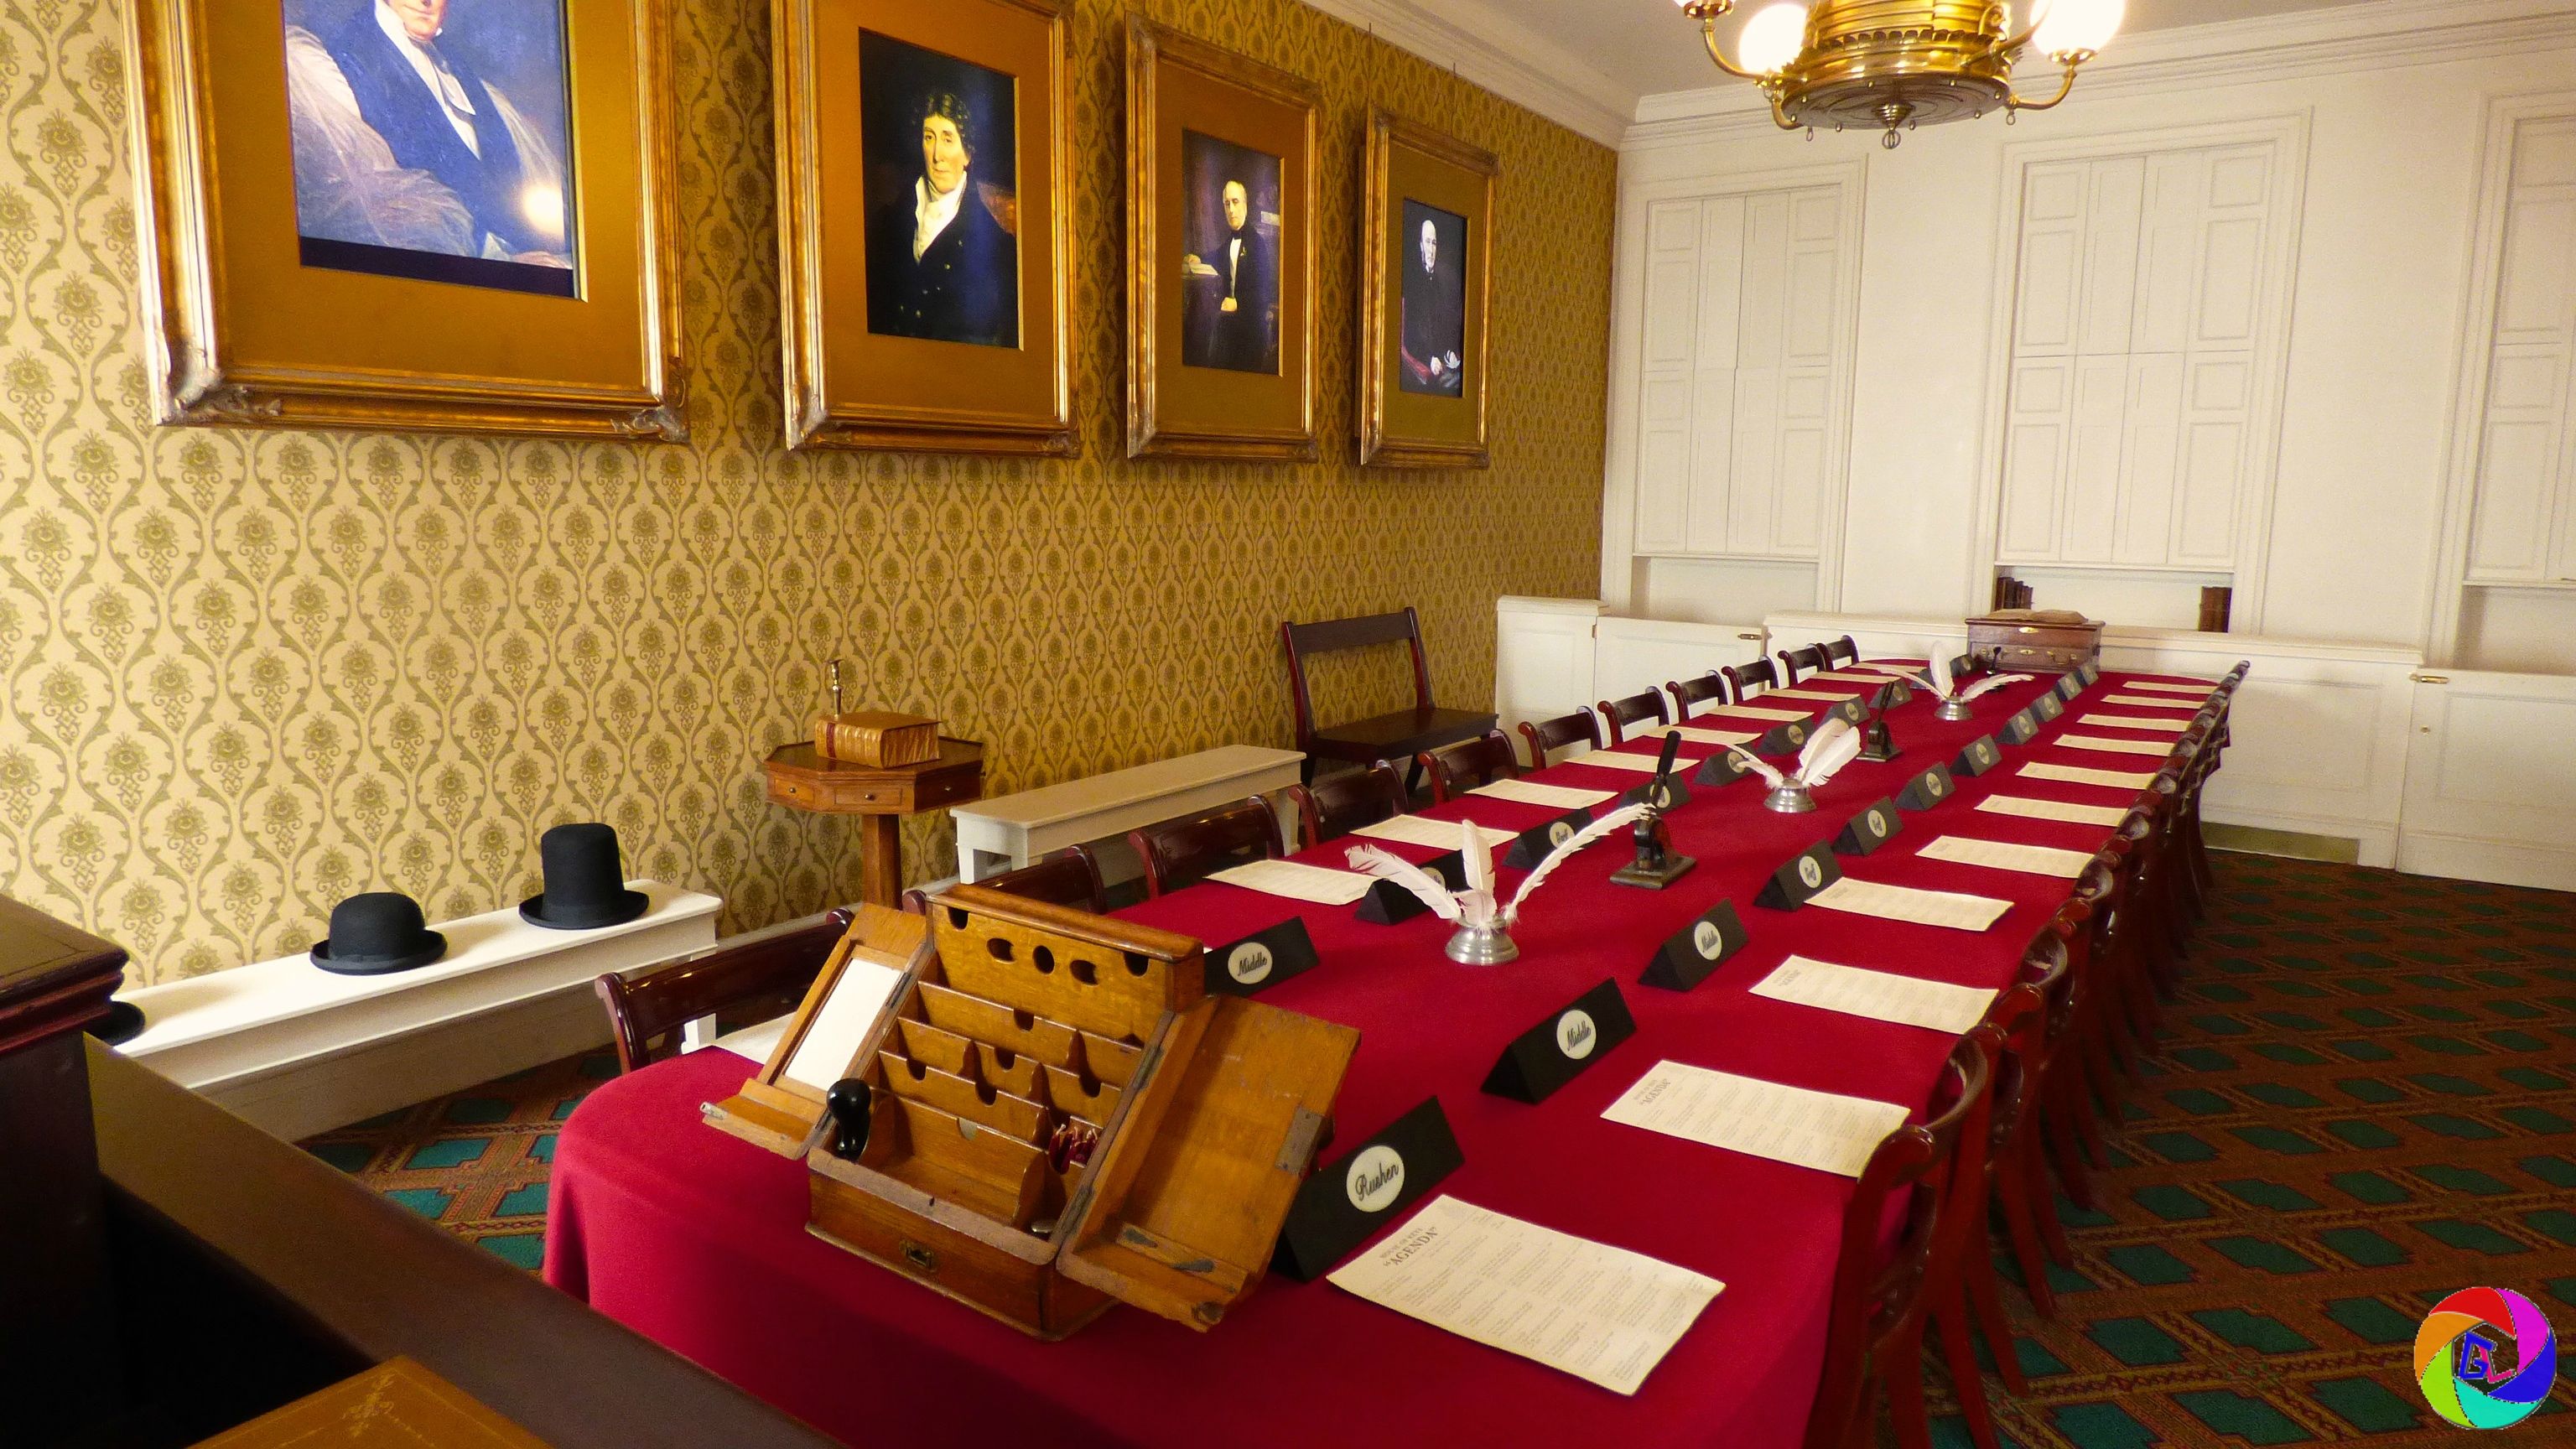 Castletown was originally the capital, and this was the parliament meeting room